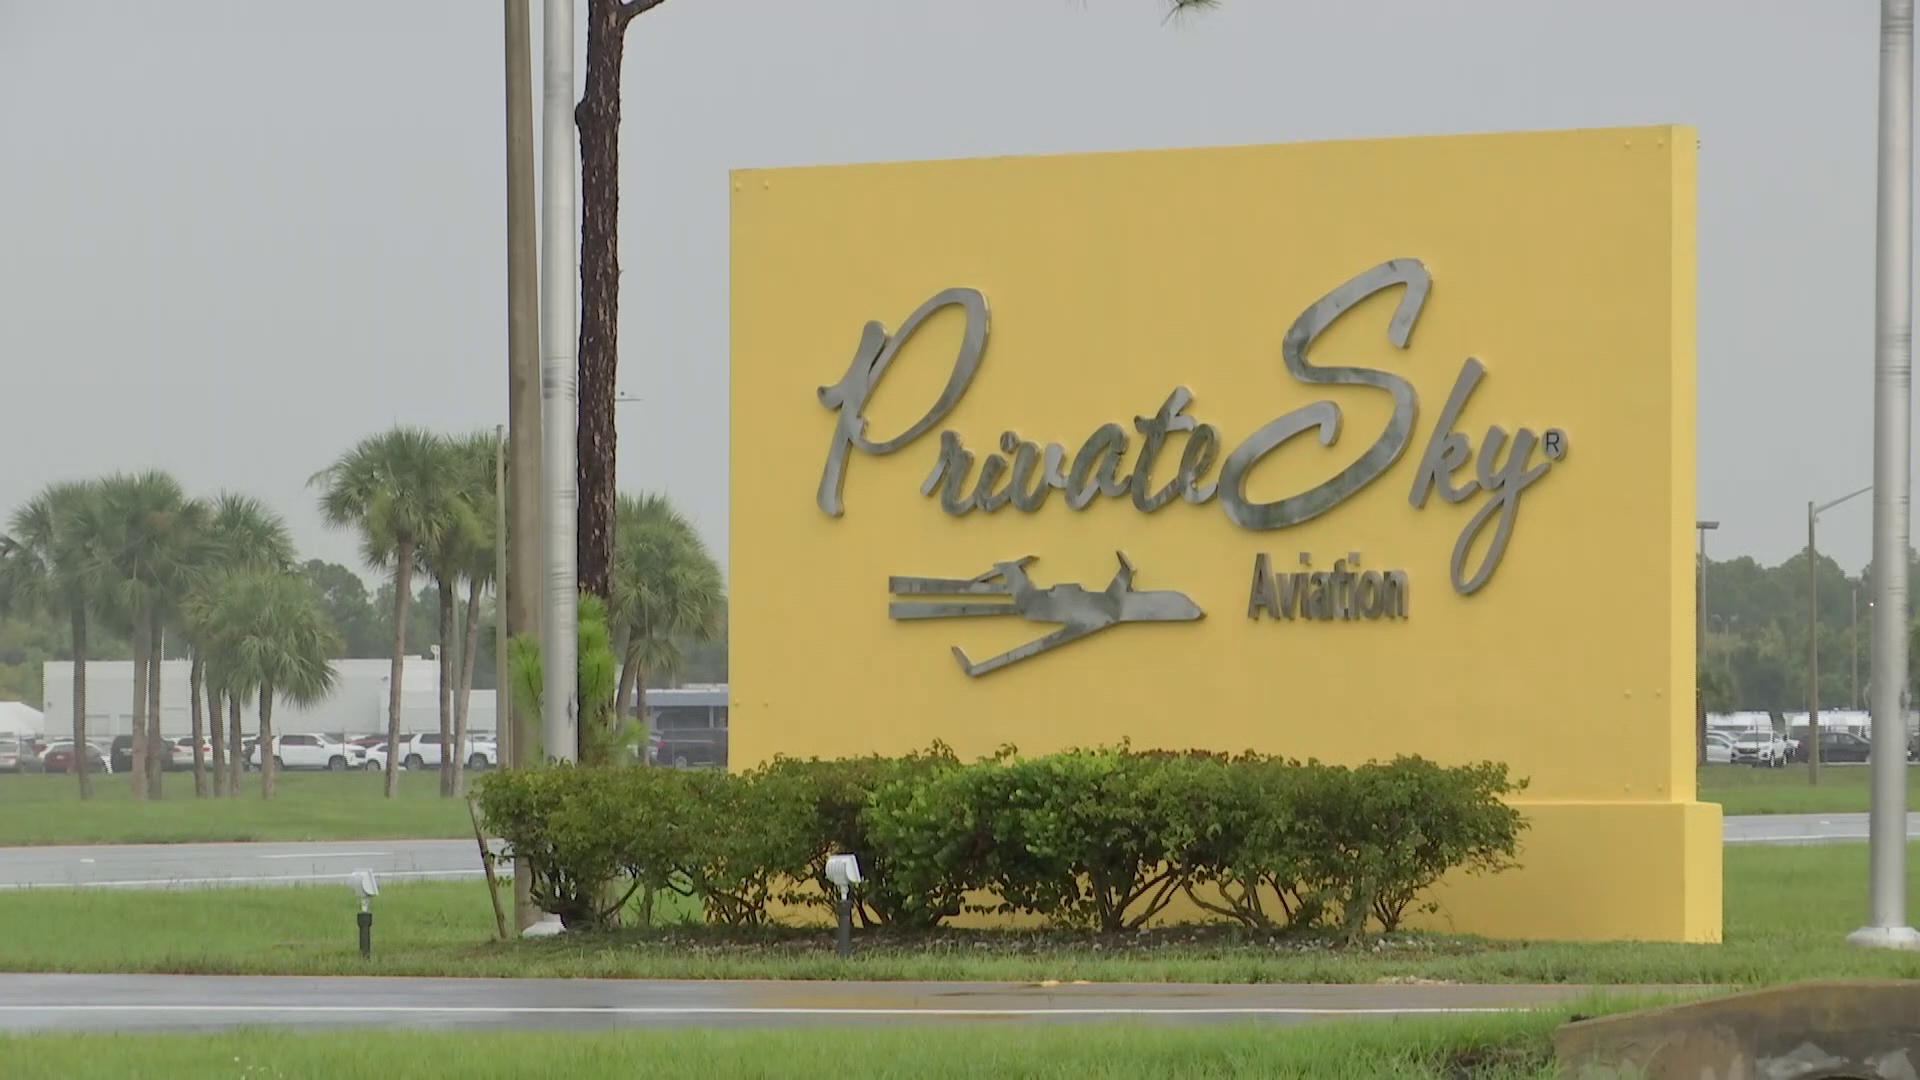 Private Sky sues Lee County Port Authority: what it could mean for you